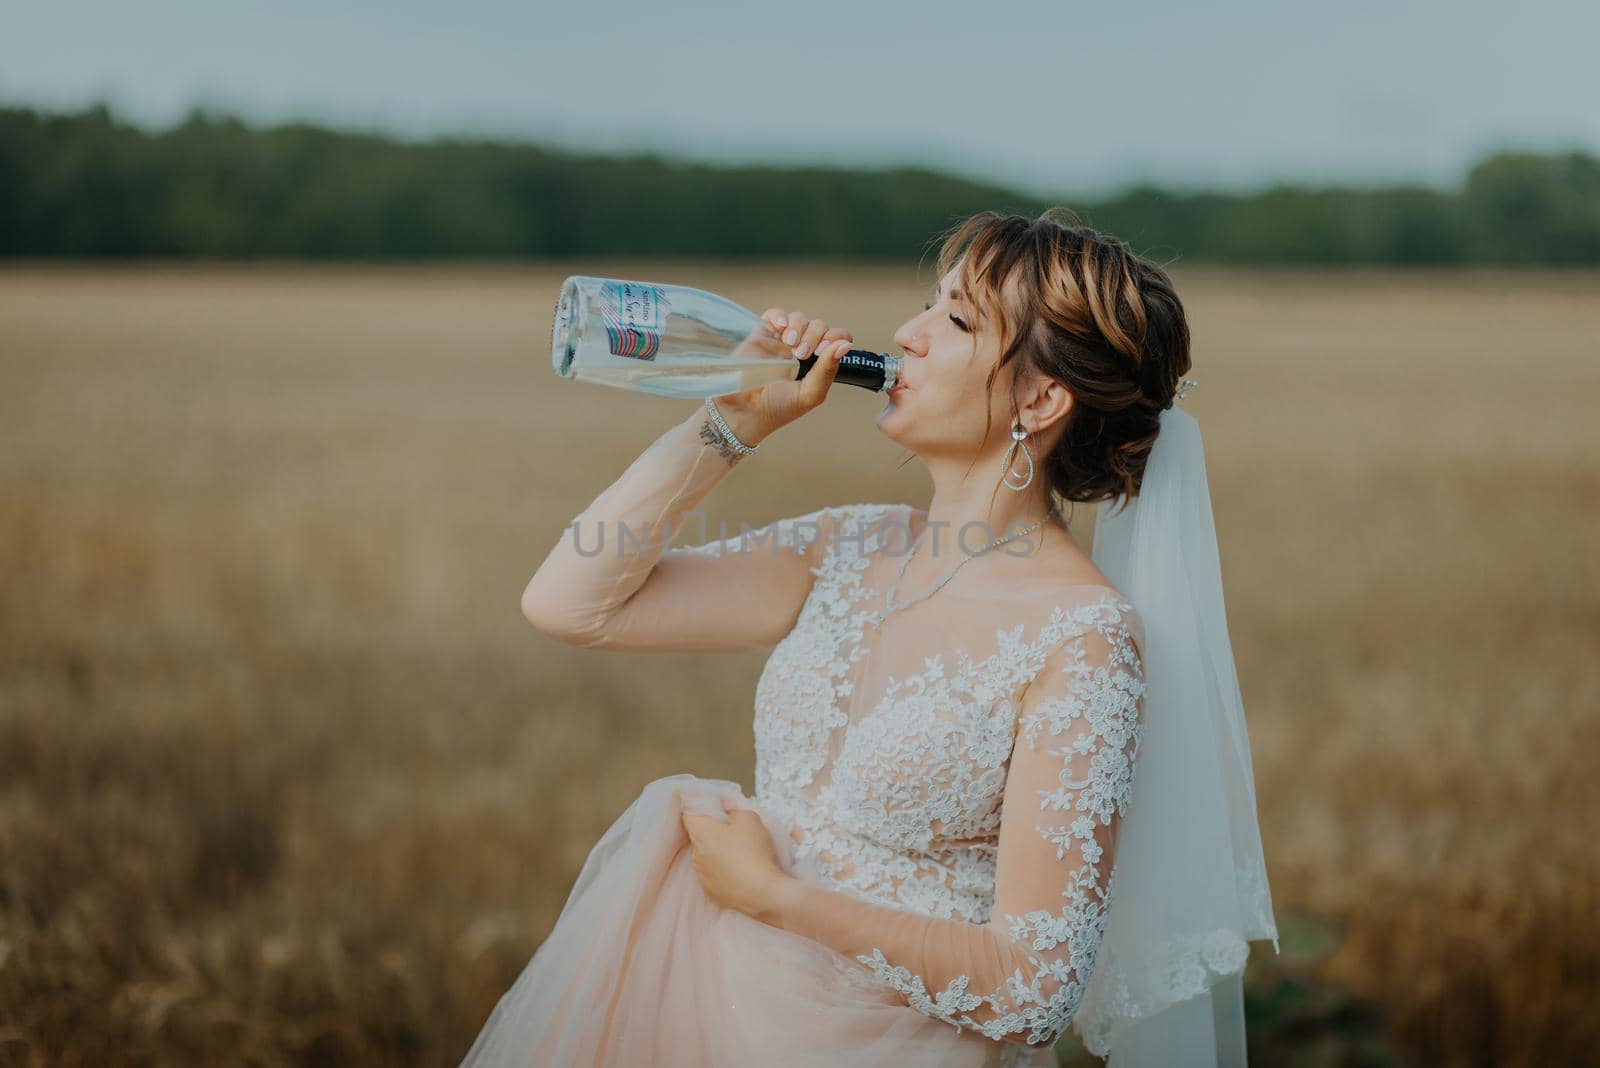 Girl in wedding dress and white veil drinking champagne from bottle. by Andrii_Ko